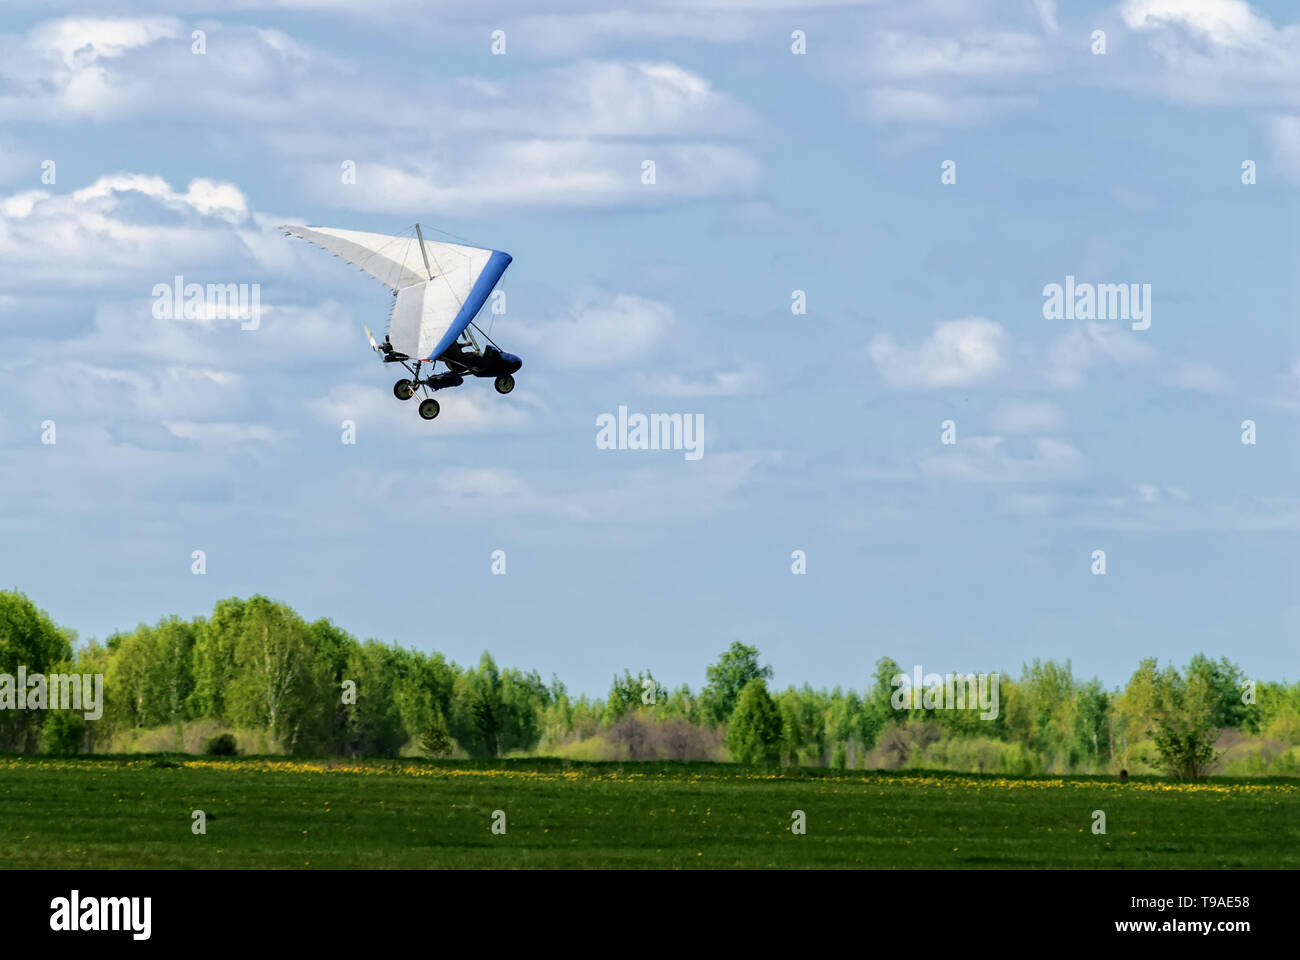 Yalutorovsk, Russia - May 24. 2008: The motorized hang glider above forest at sport airdrome Stock Photo